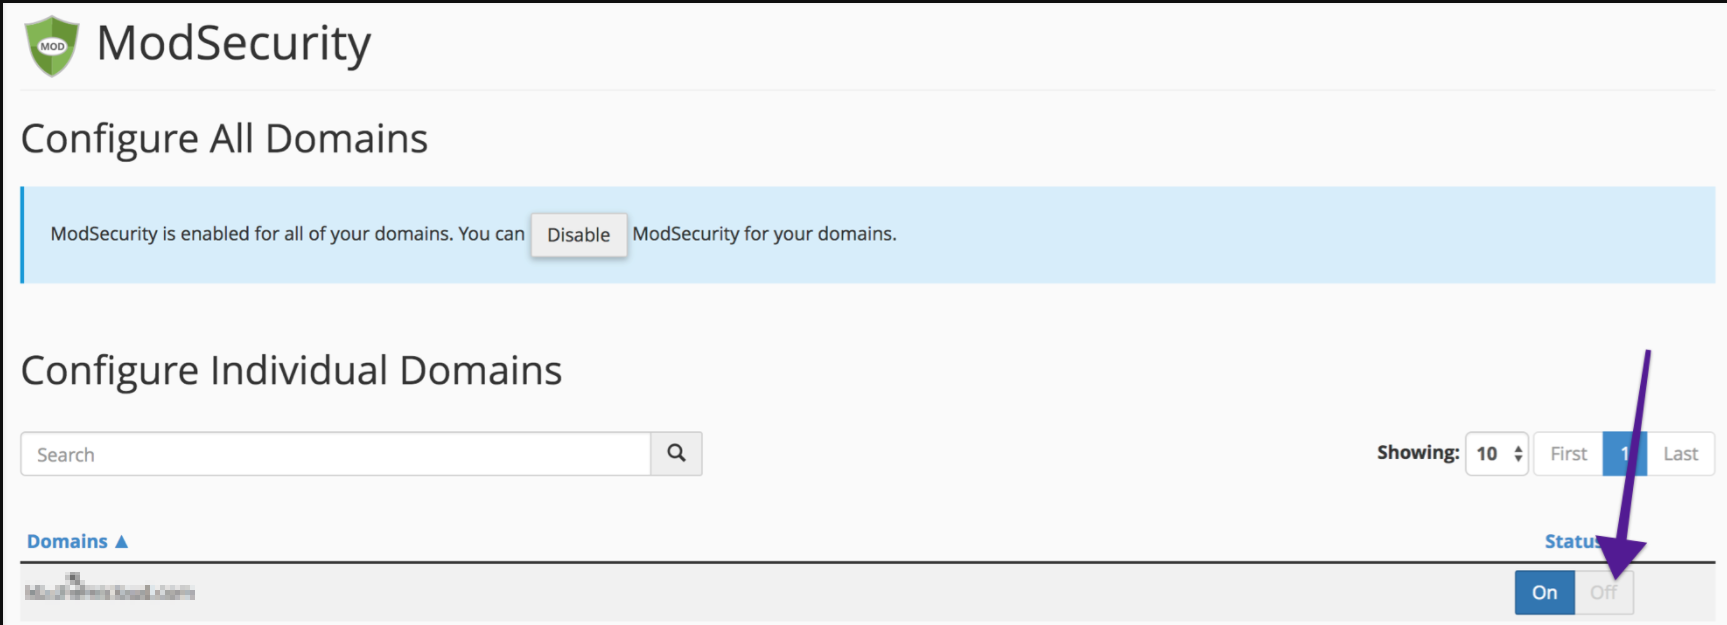 ModSecurity: Disable option for your domains